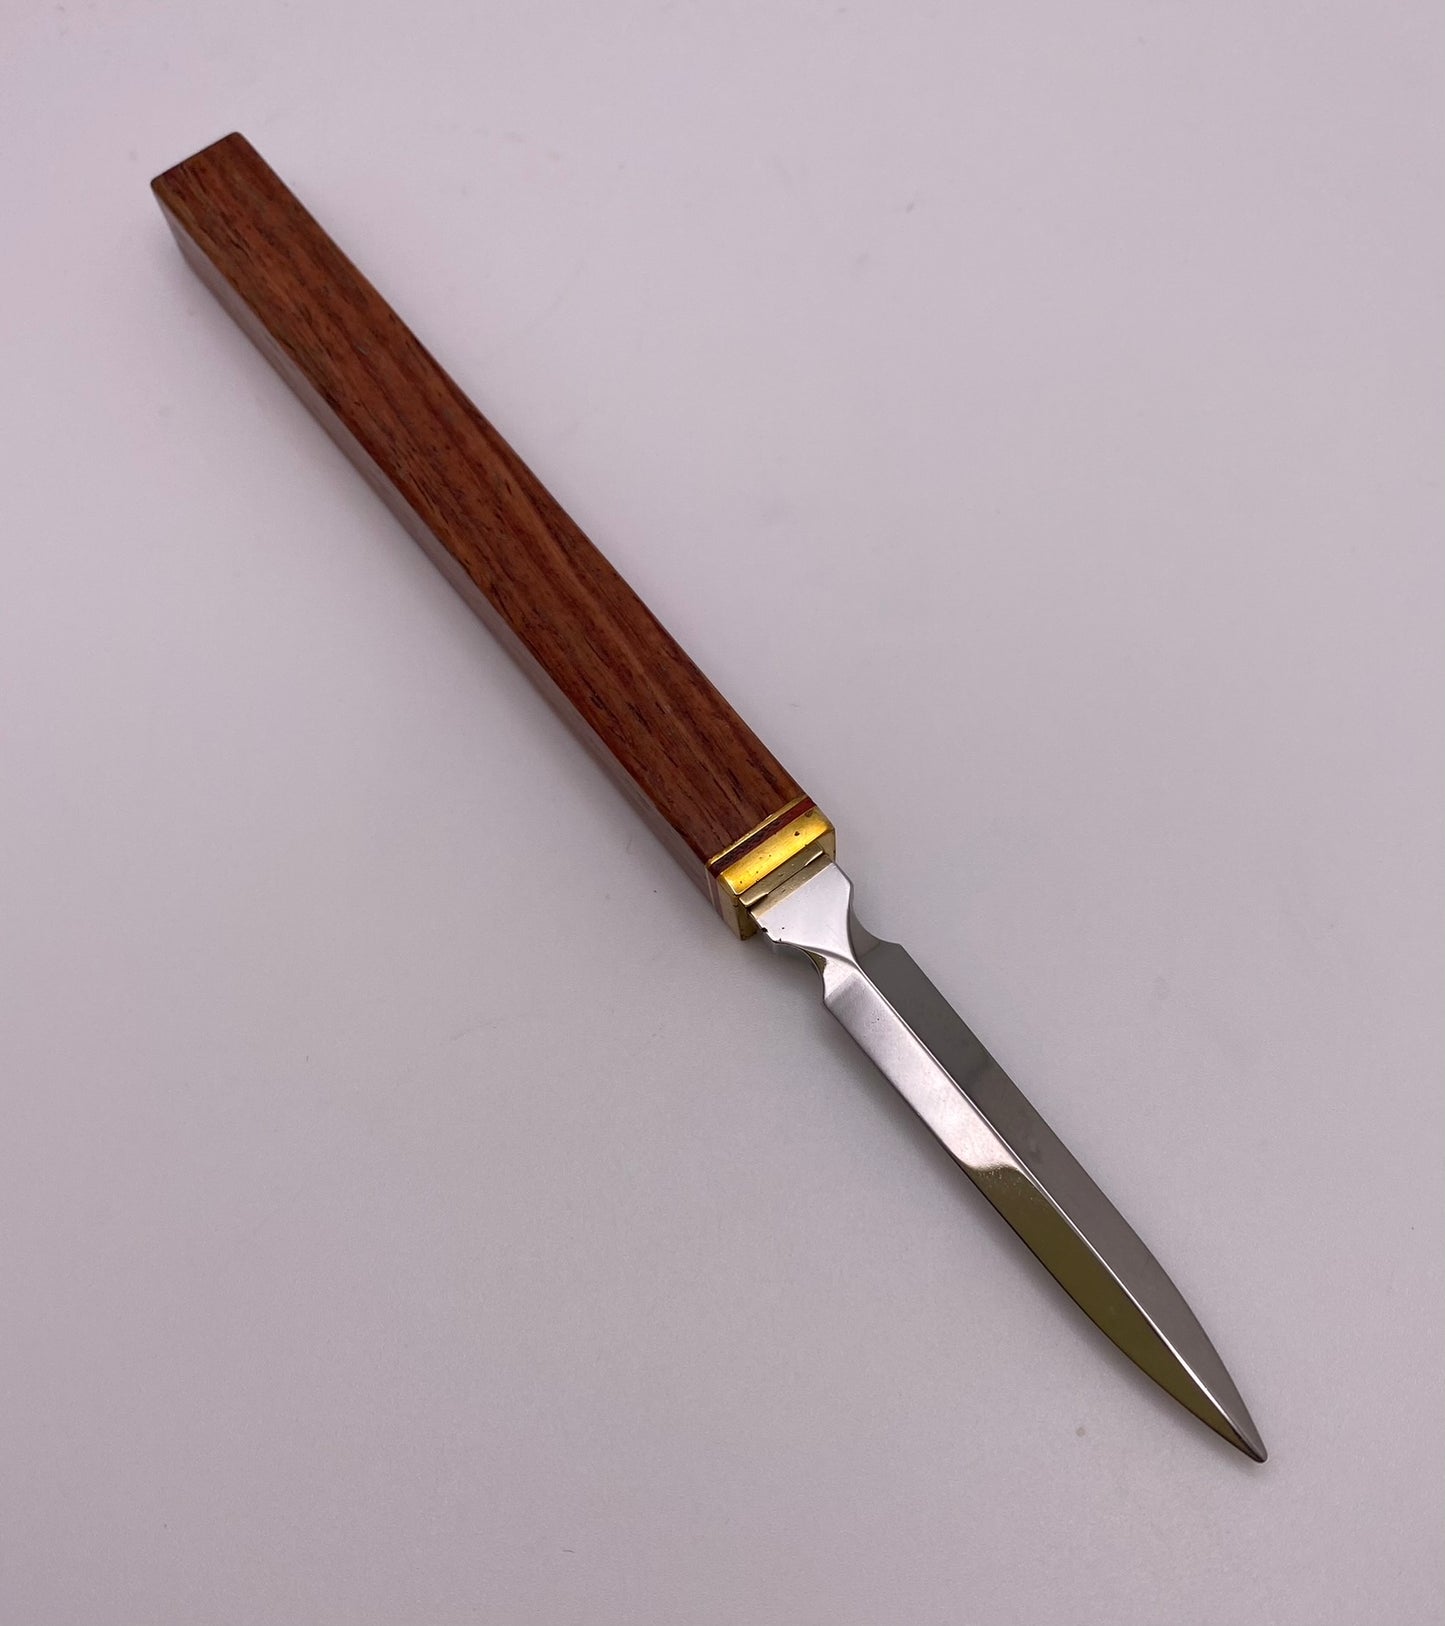 Pu'er Tea Knife with Square Wooden Handle